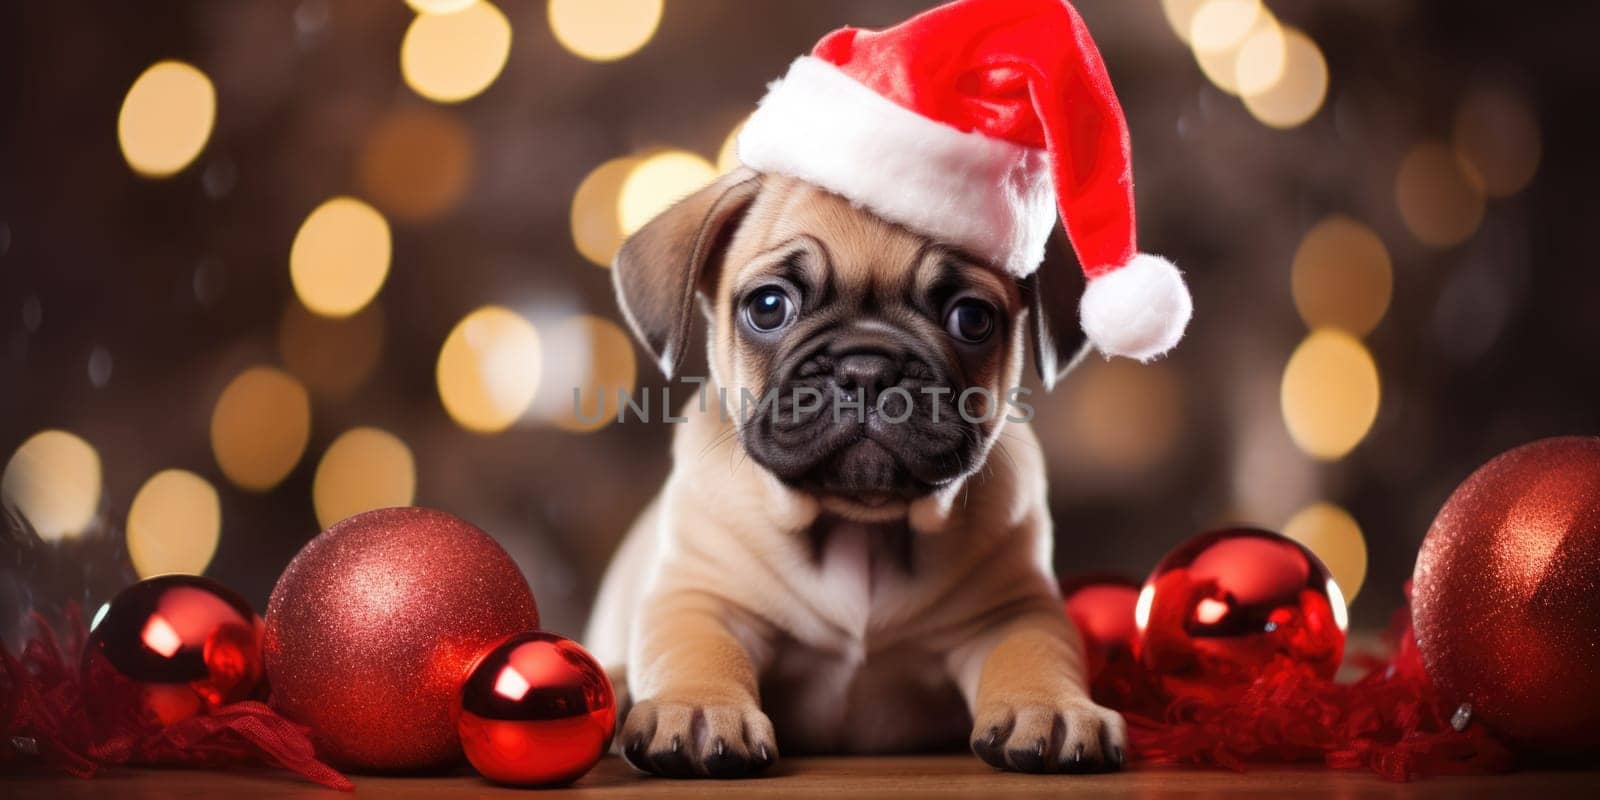 Adorable dog wearing Santa hats at room decorated for Christmas comeliness